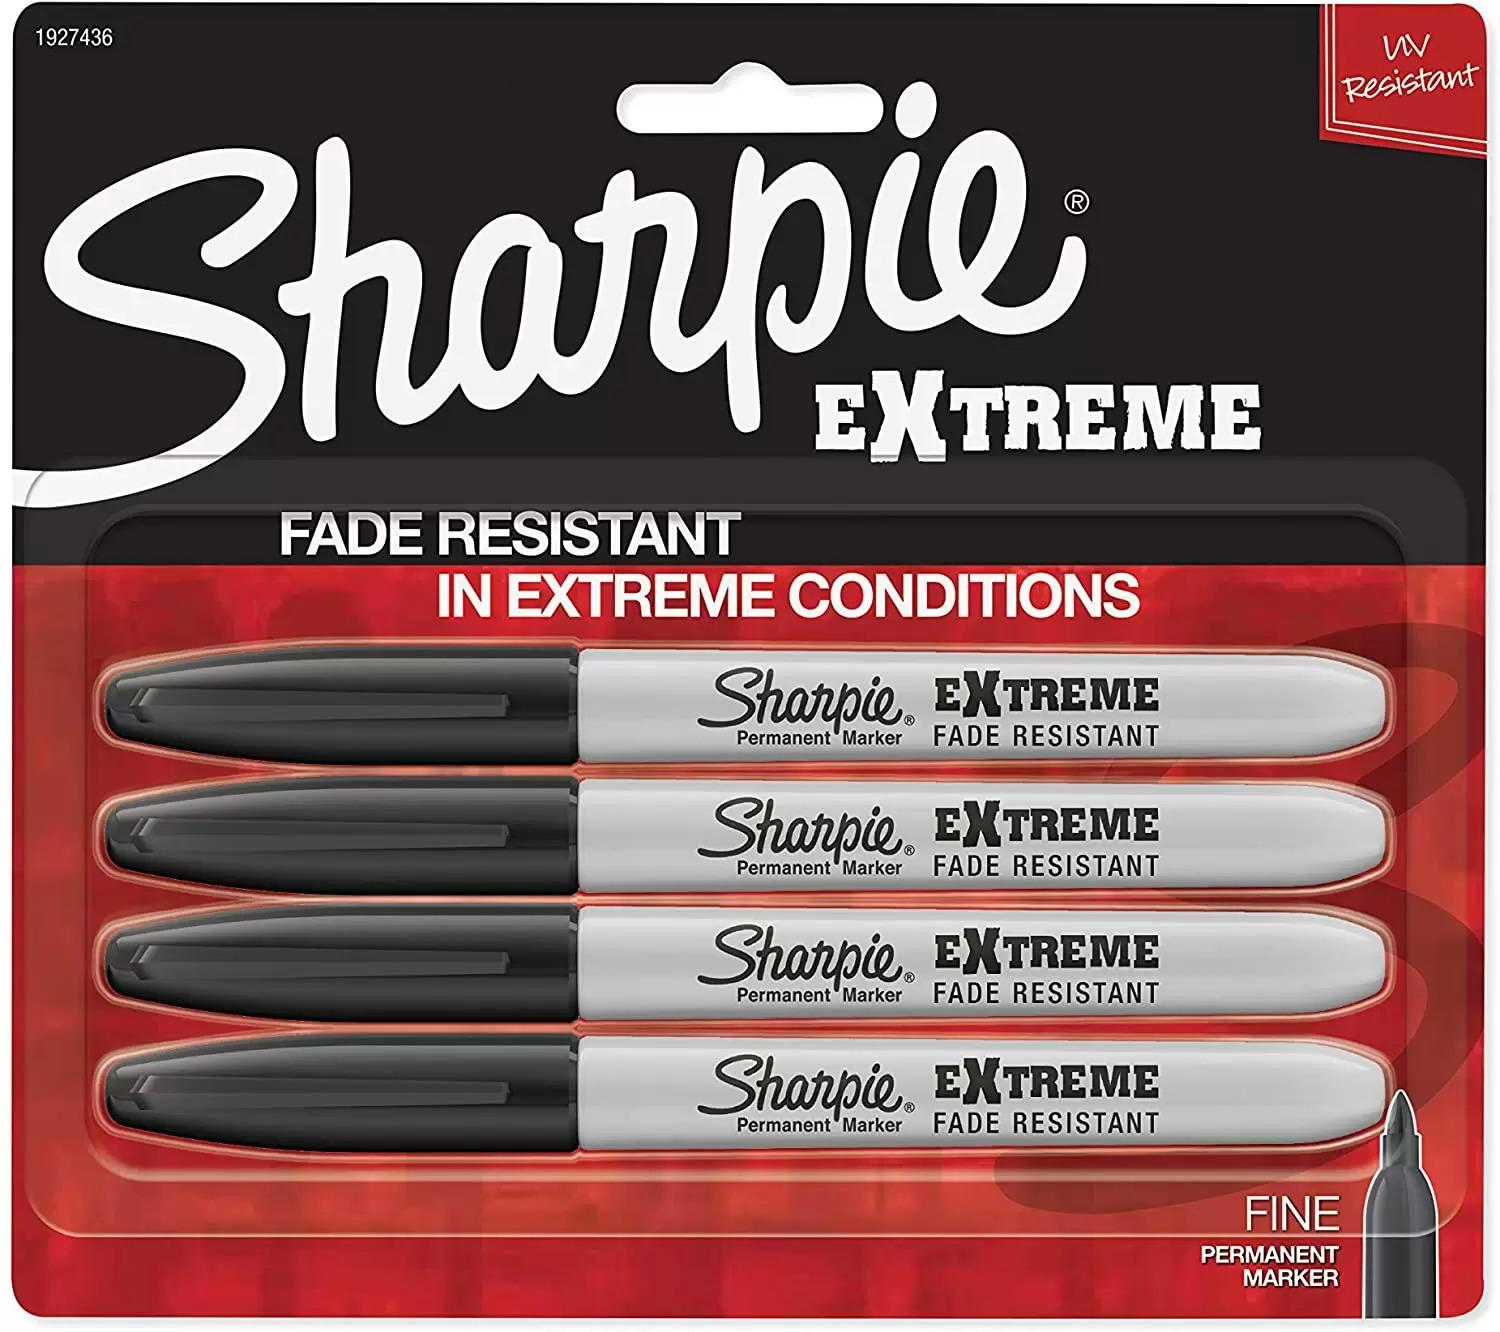 4 Sharpie Extreme Fade Resistant Permanent Markers for $2.97